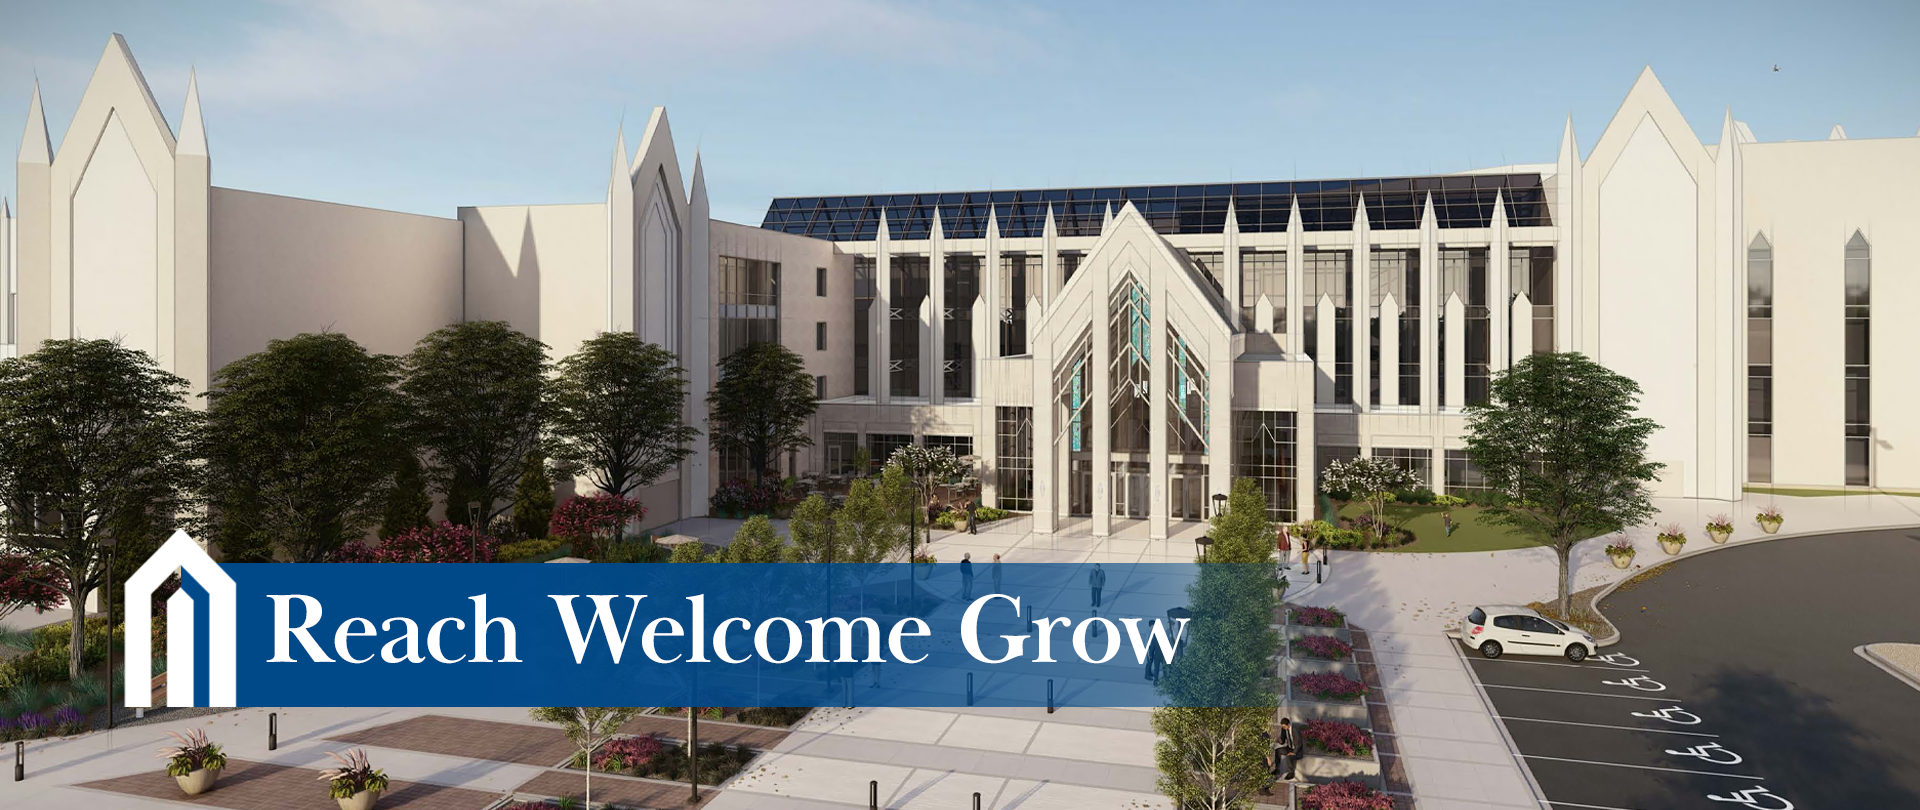 Reach Welcome Grow
Groundbreaking Ceremony
Sunday, June 11 at 11:15 AM
